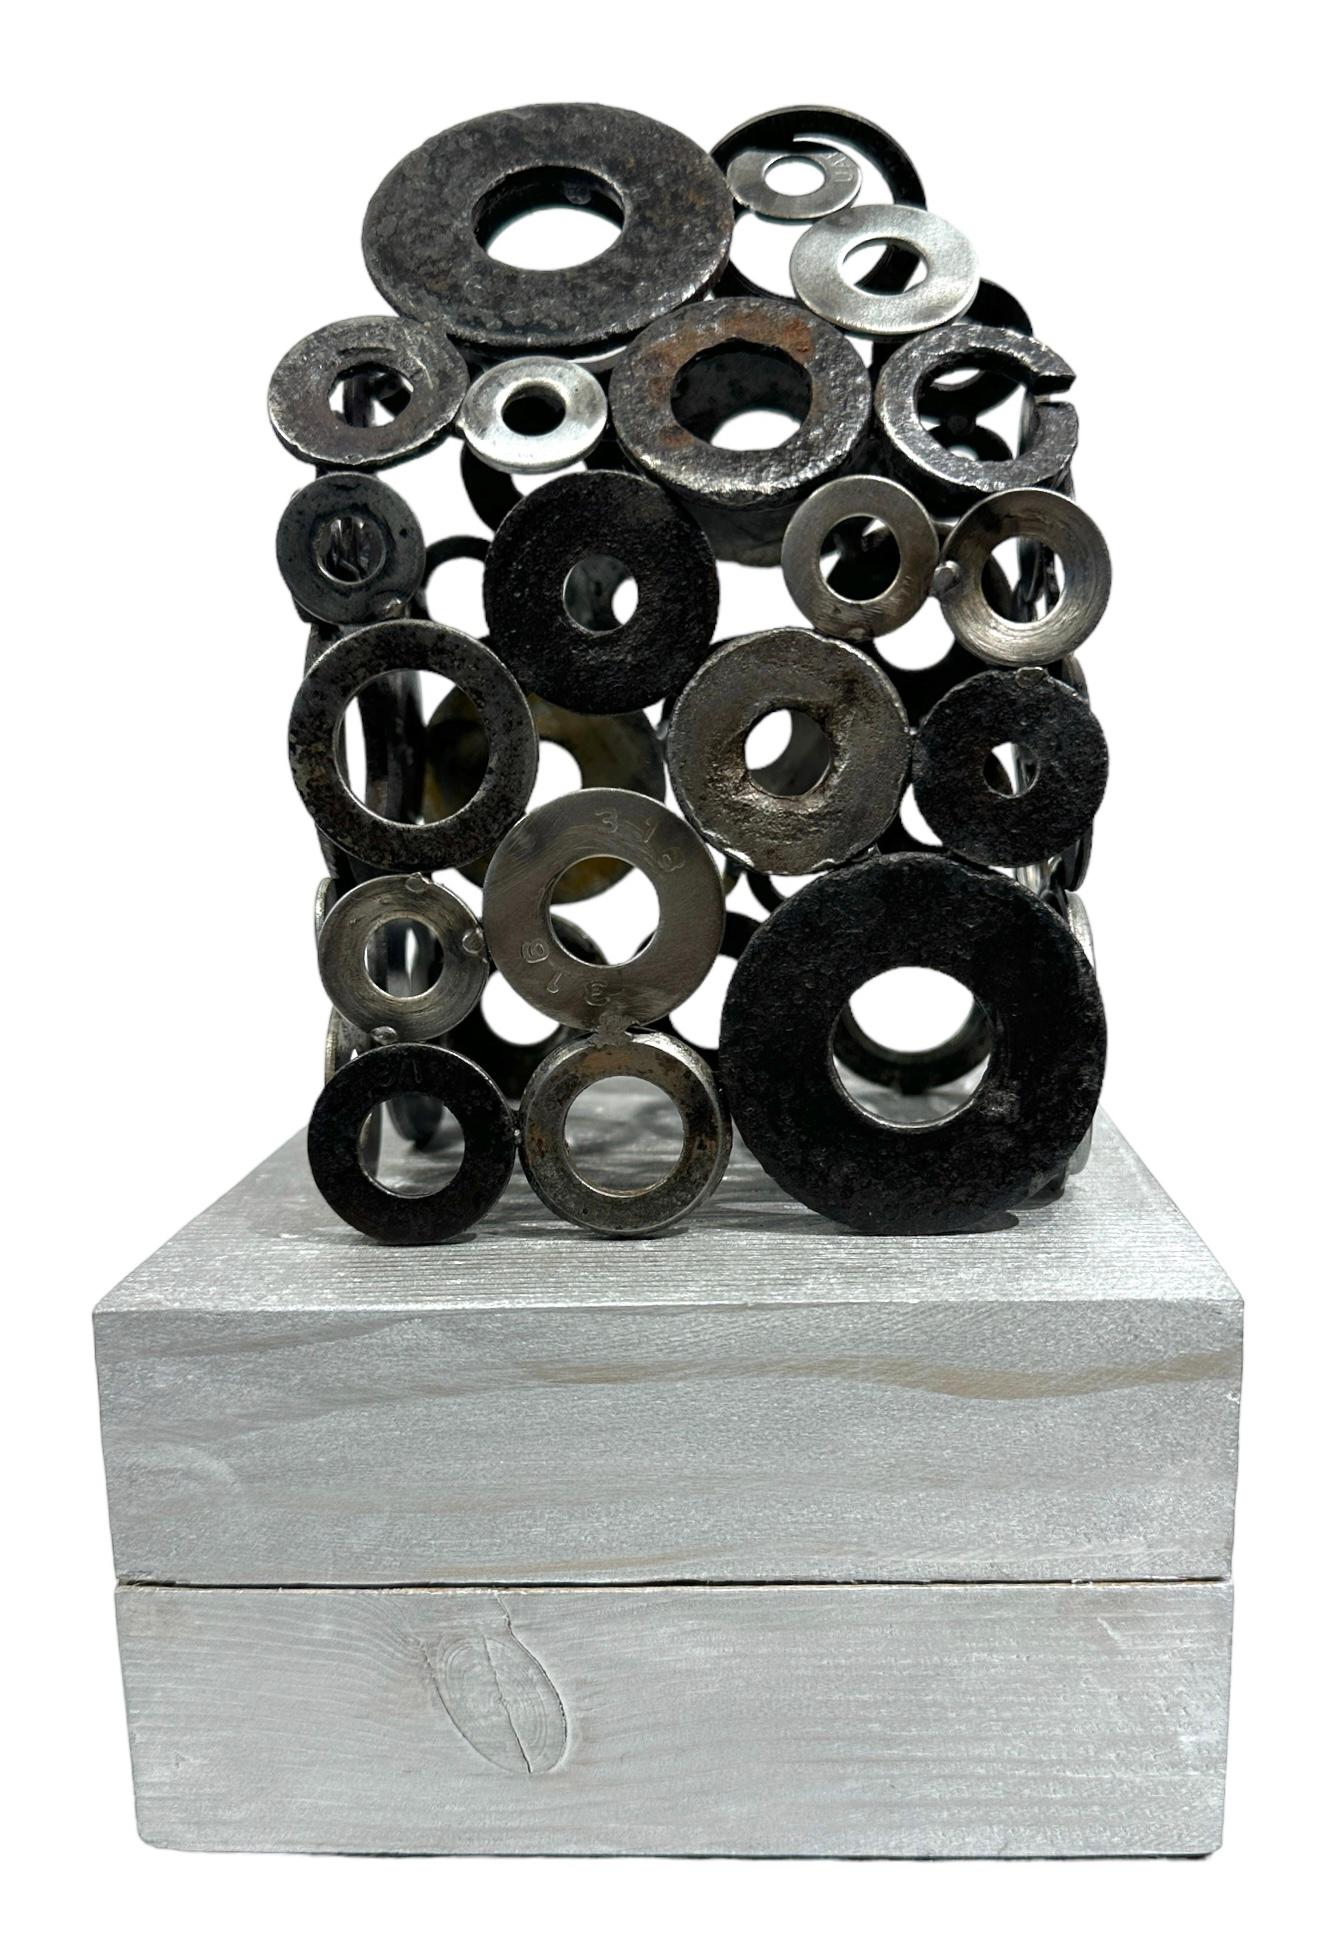 Welded Jim Rose - Construct No. 02, Salvaged Steel and Aluminum Industrial Objects For Sale